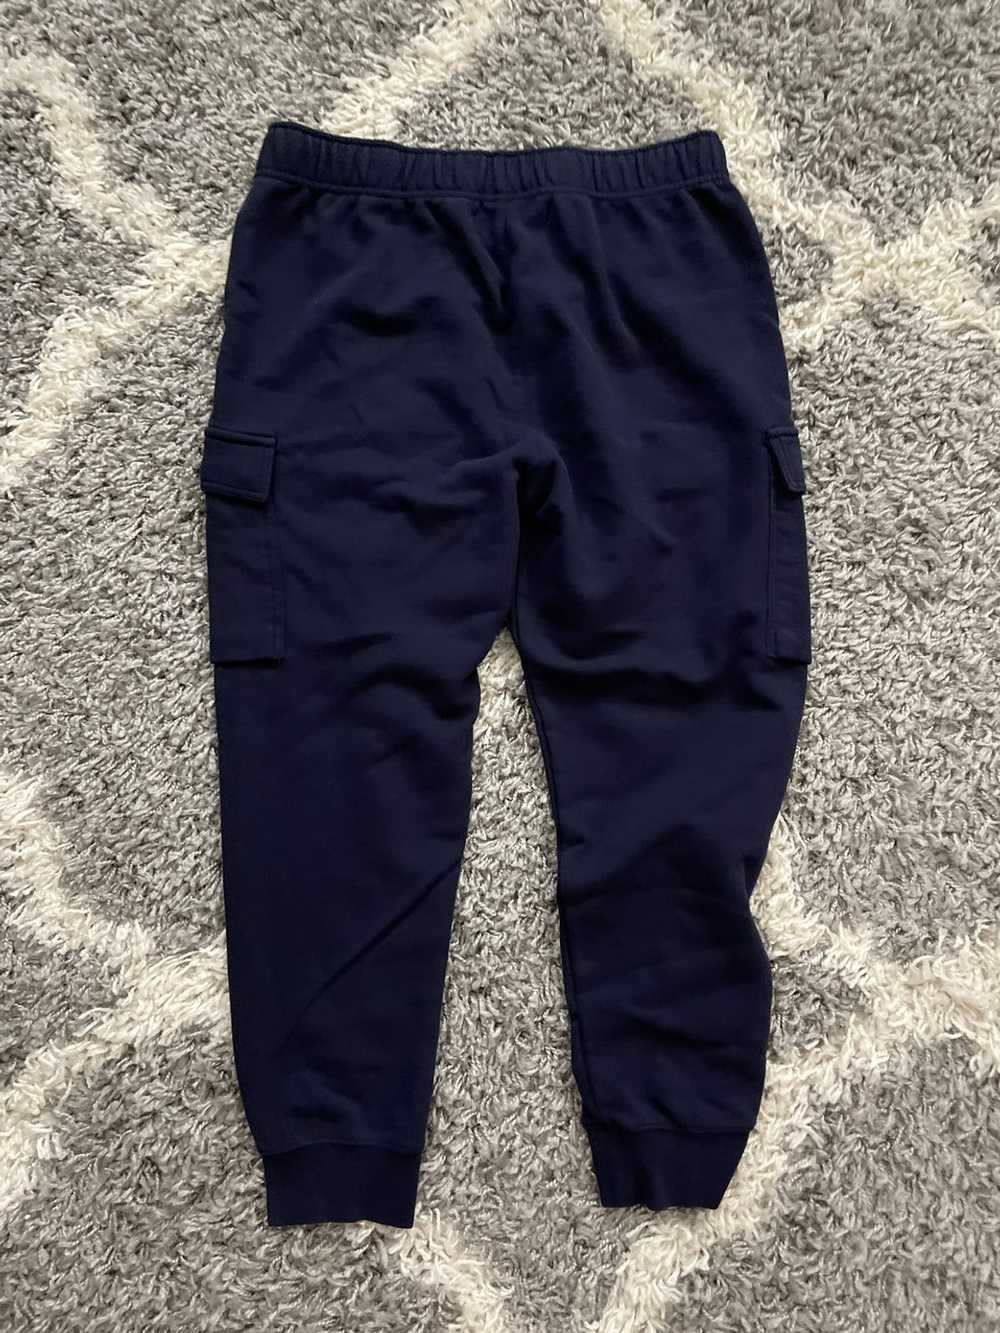 Octobers Very Own OVO Octobers Very Own Navy Jogg… - image 4